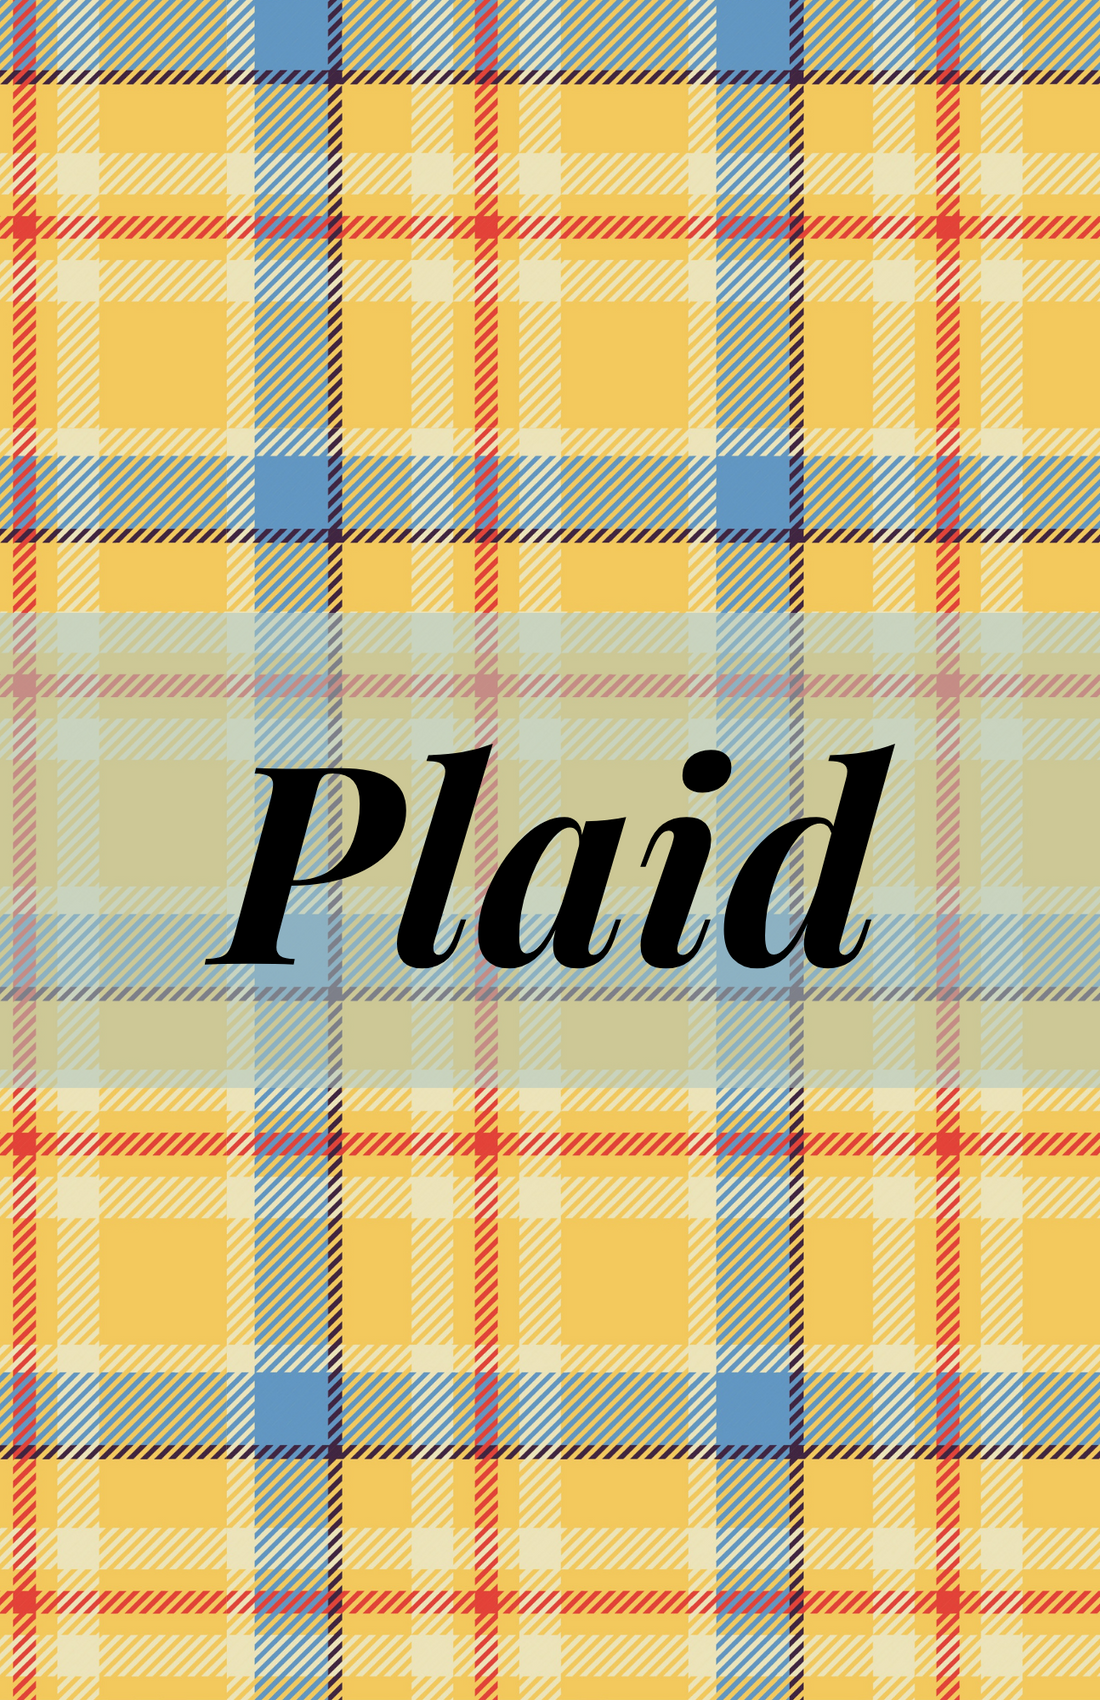 What is Plaid?